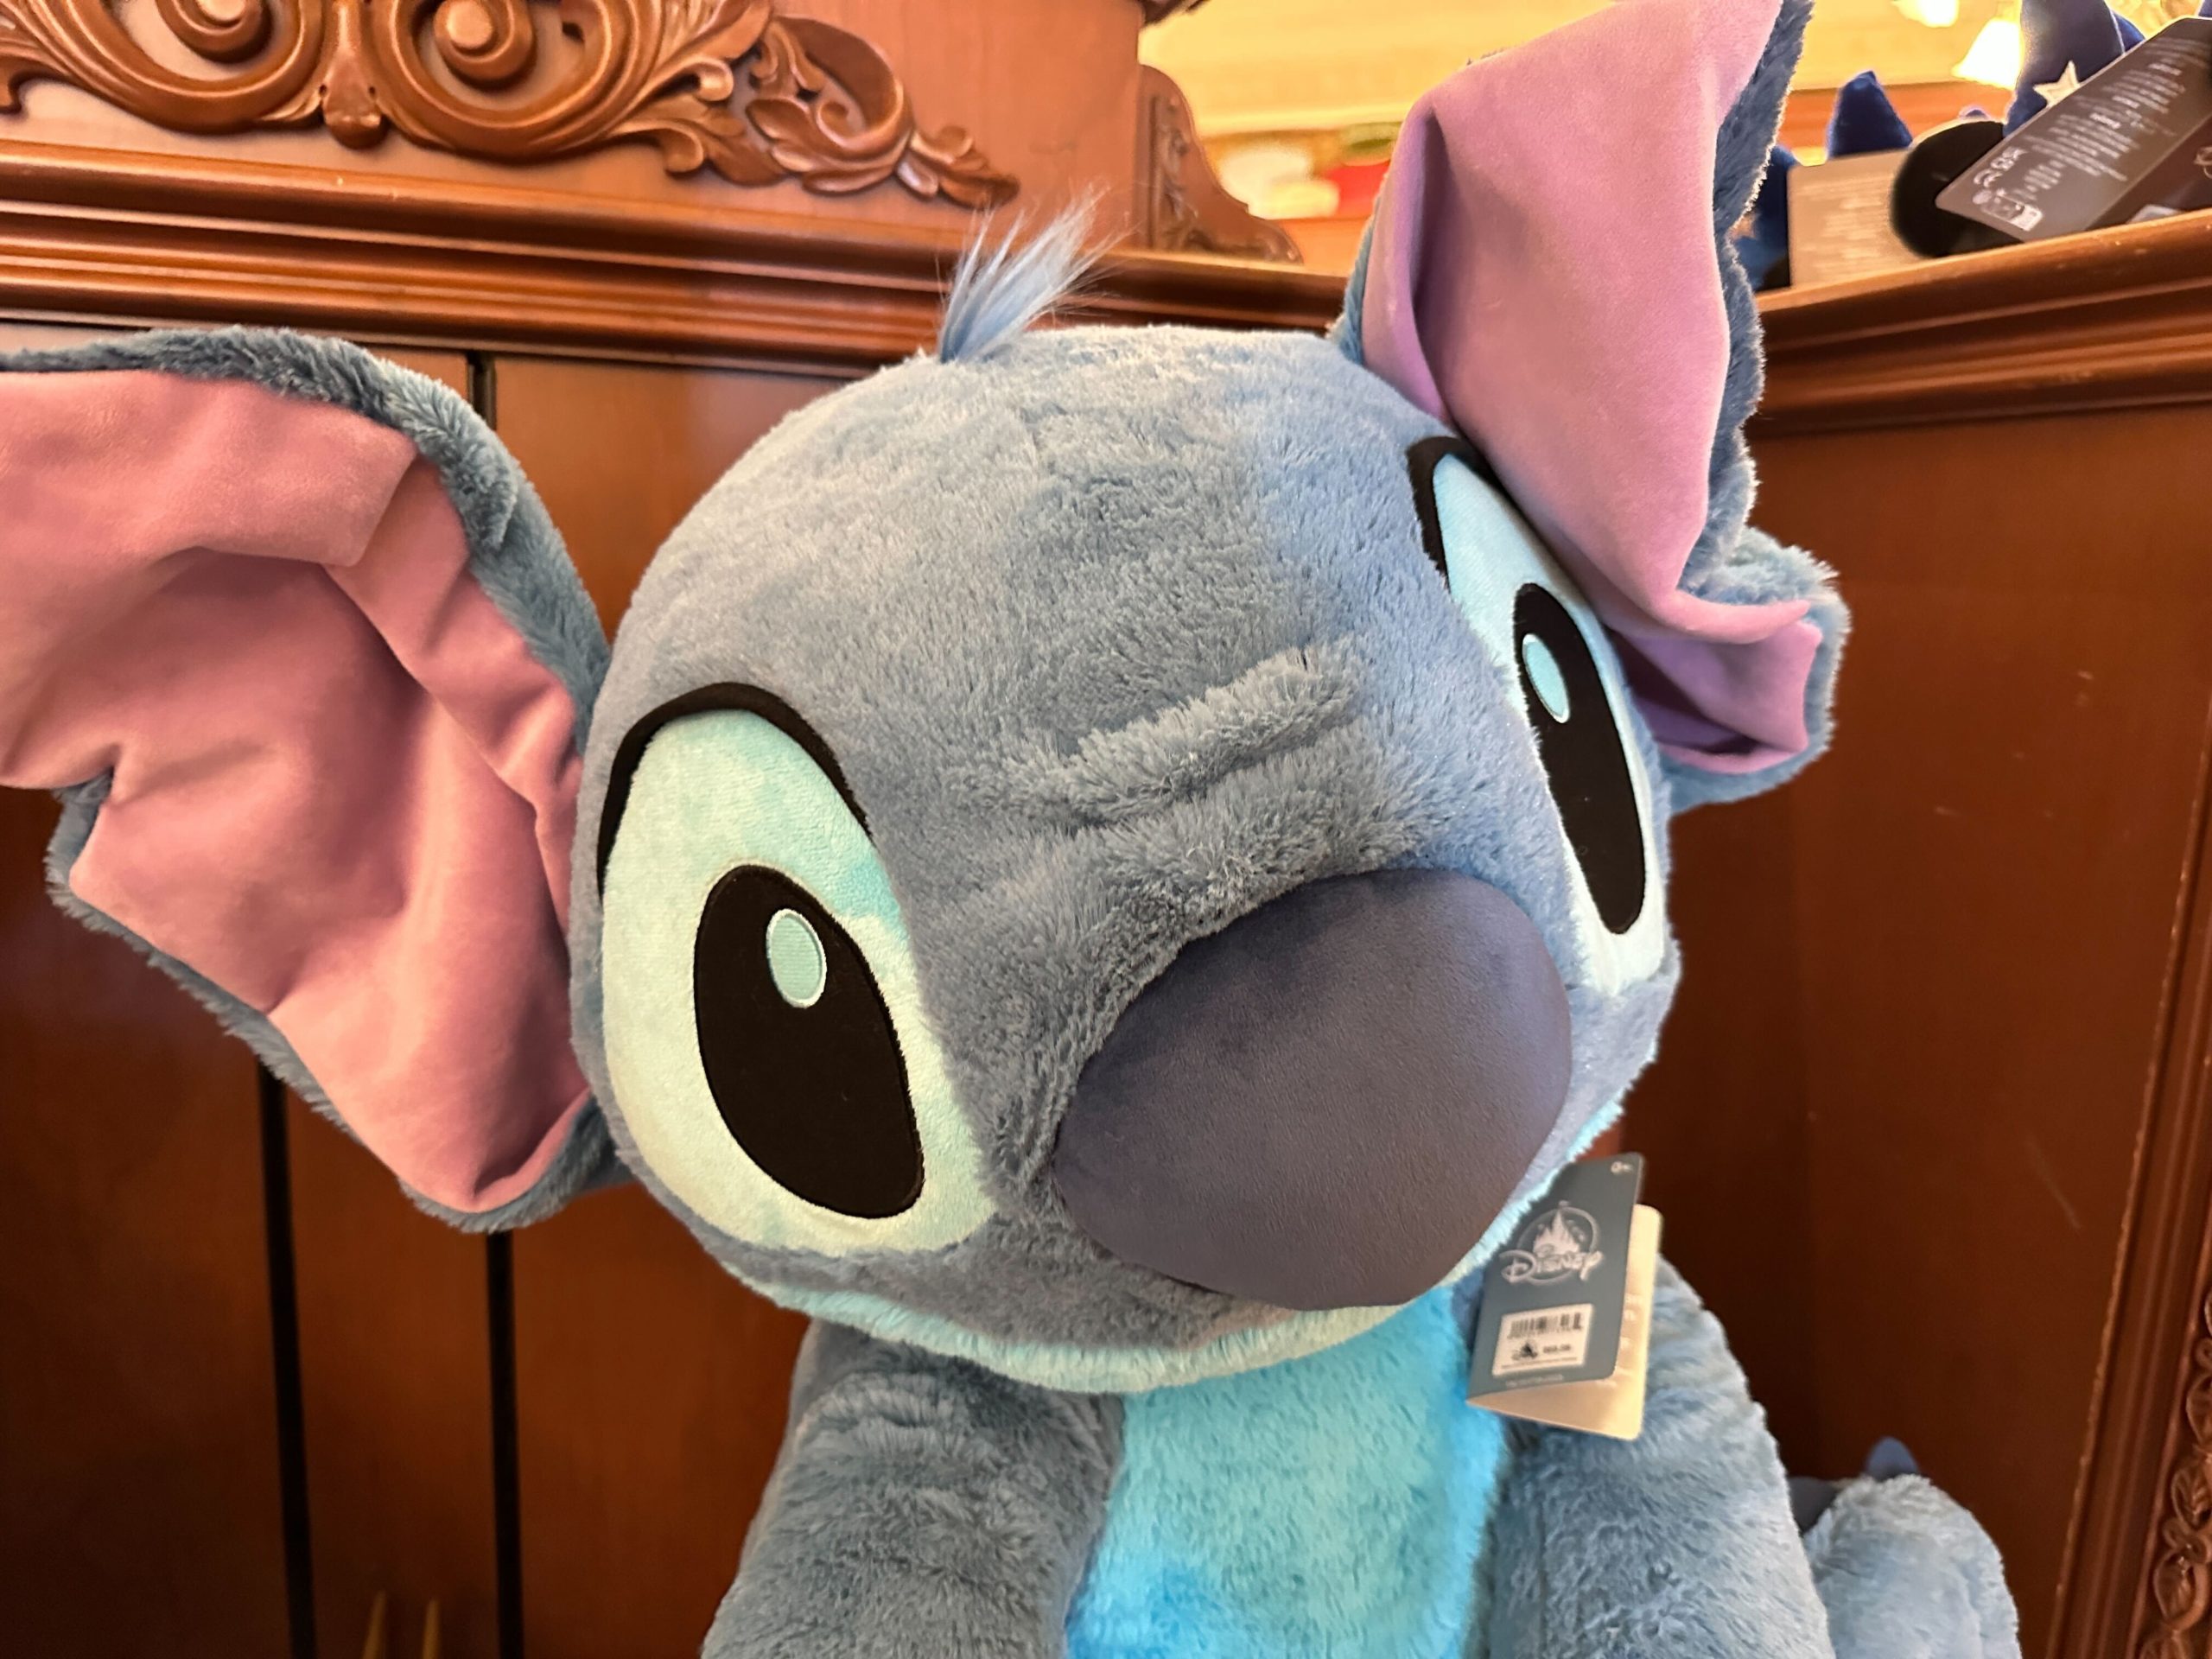 If You Are A Stitch Fan, You Have to See This Giant Plush 